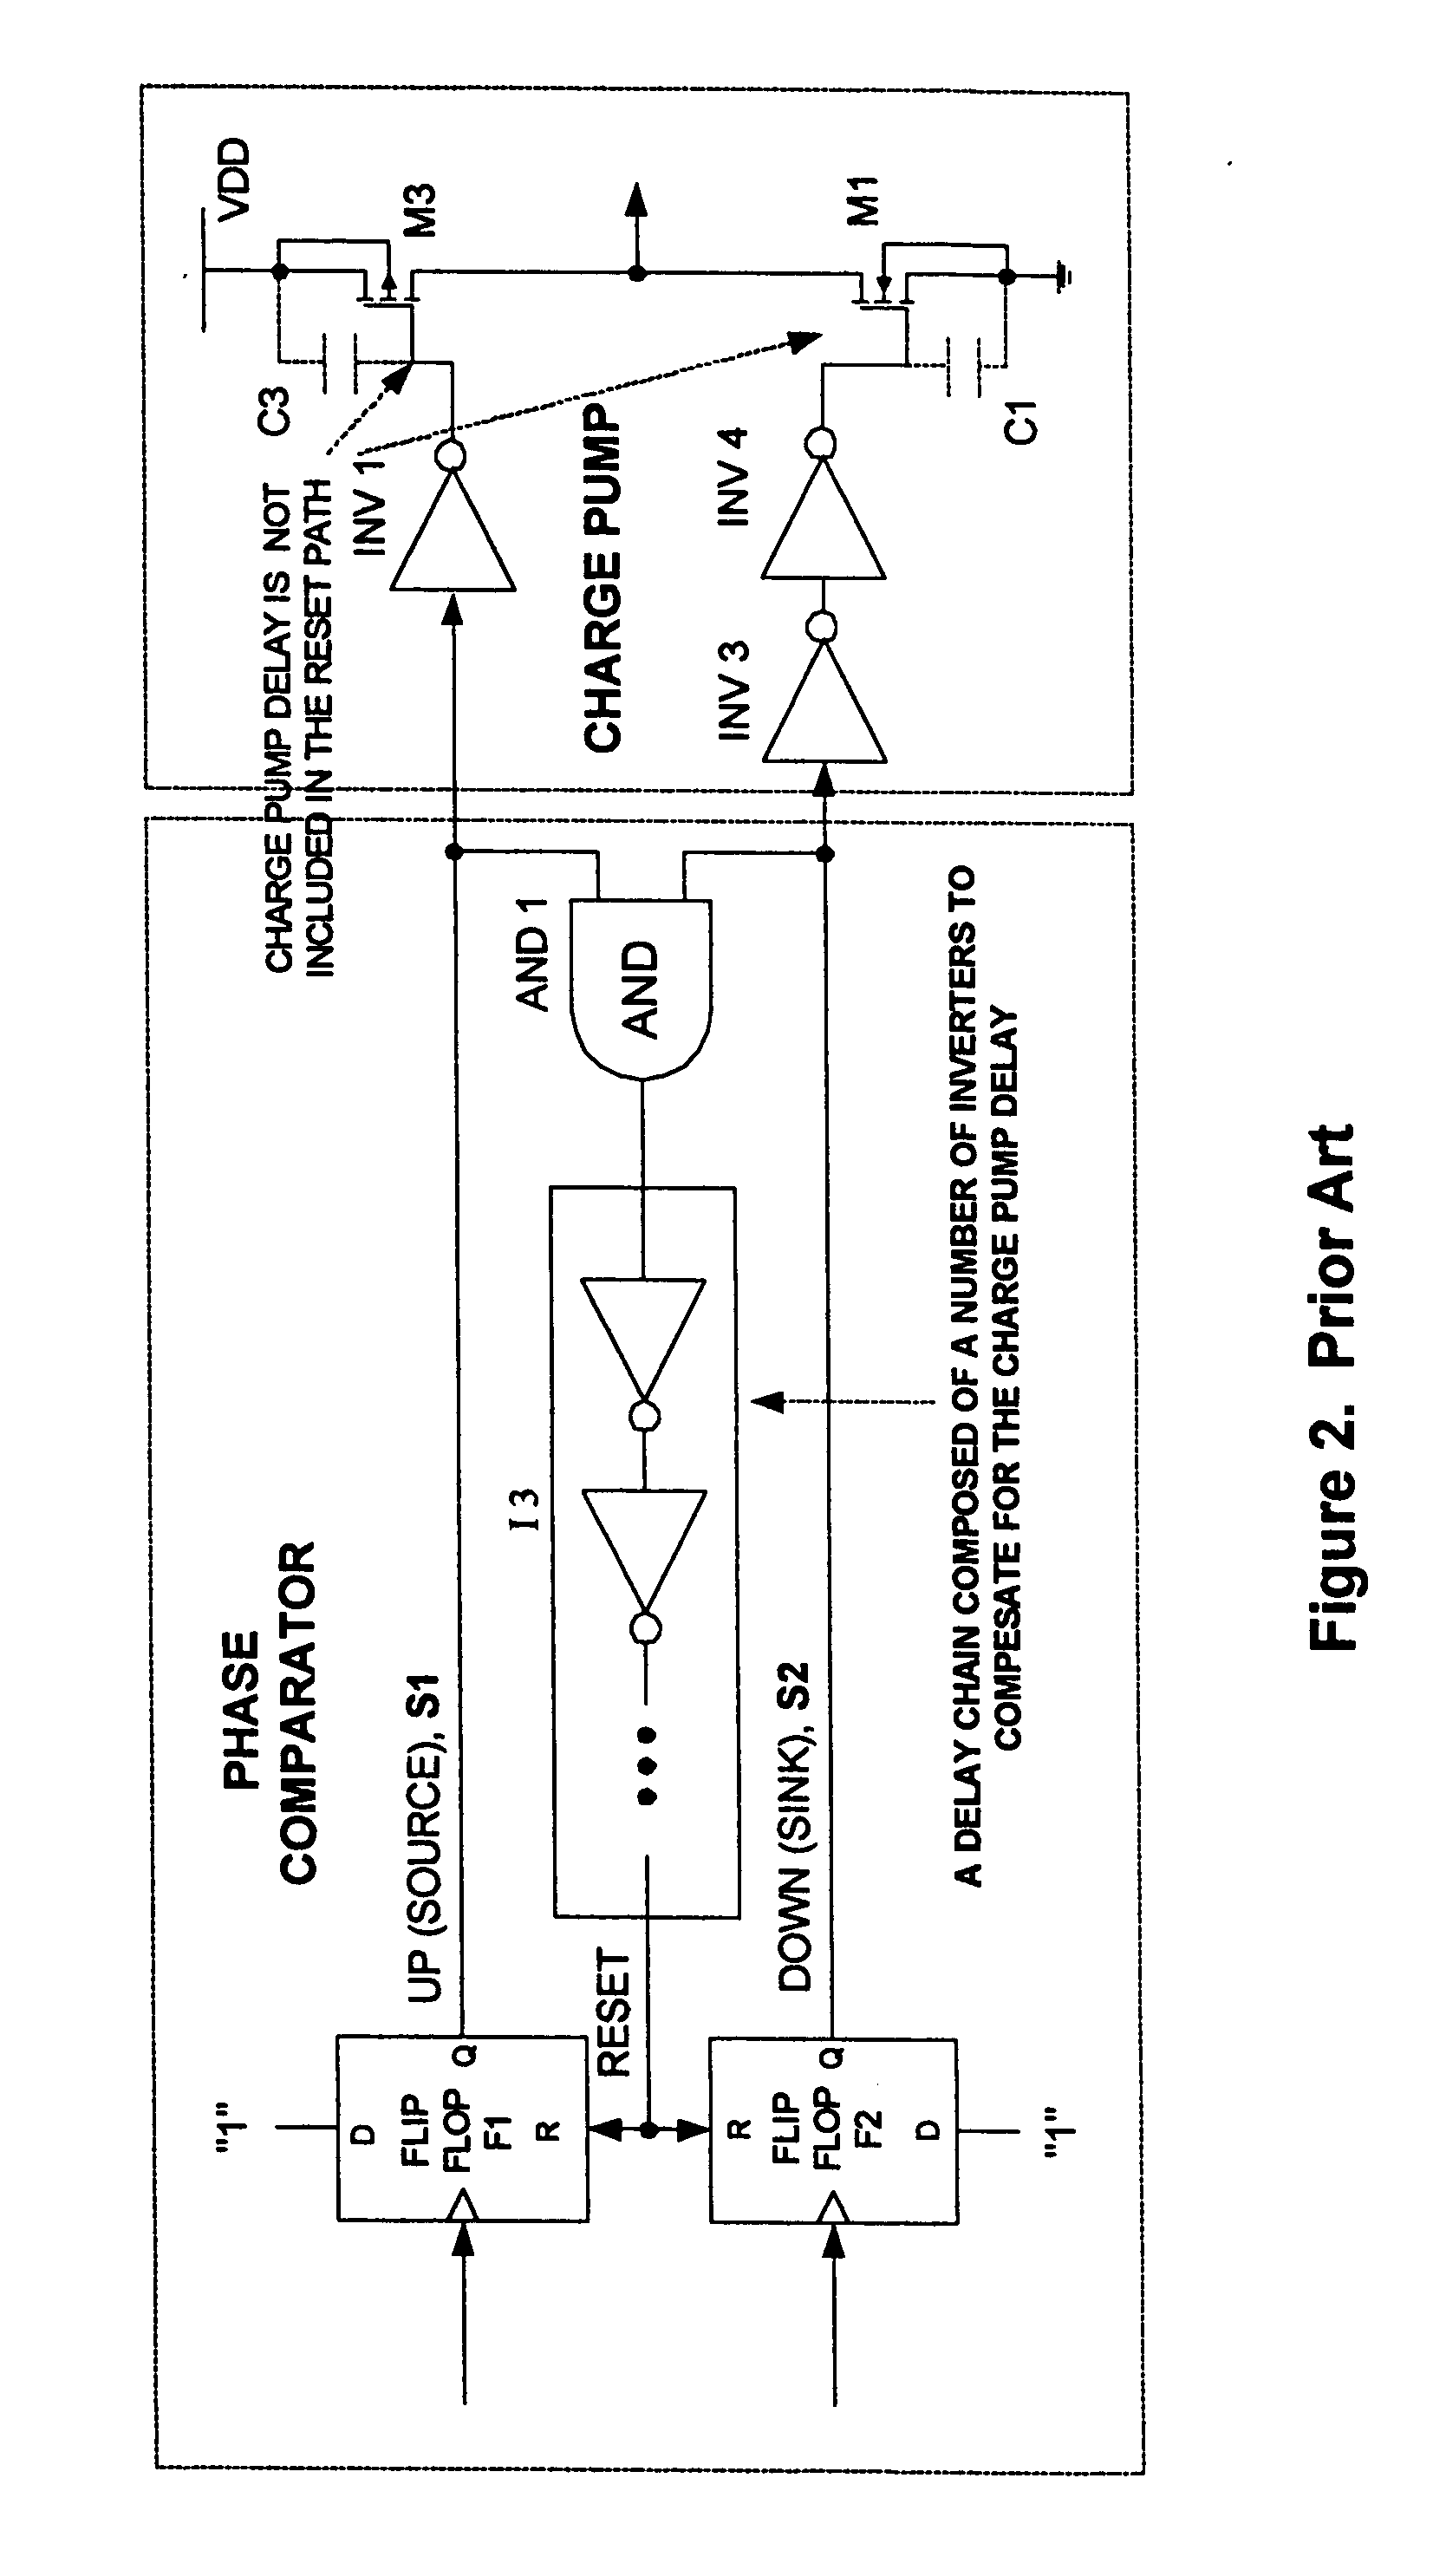 Charge pump for phase-locked loop